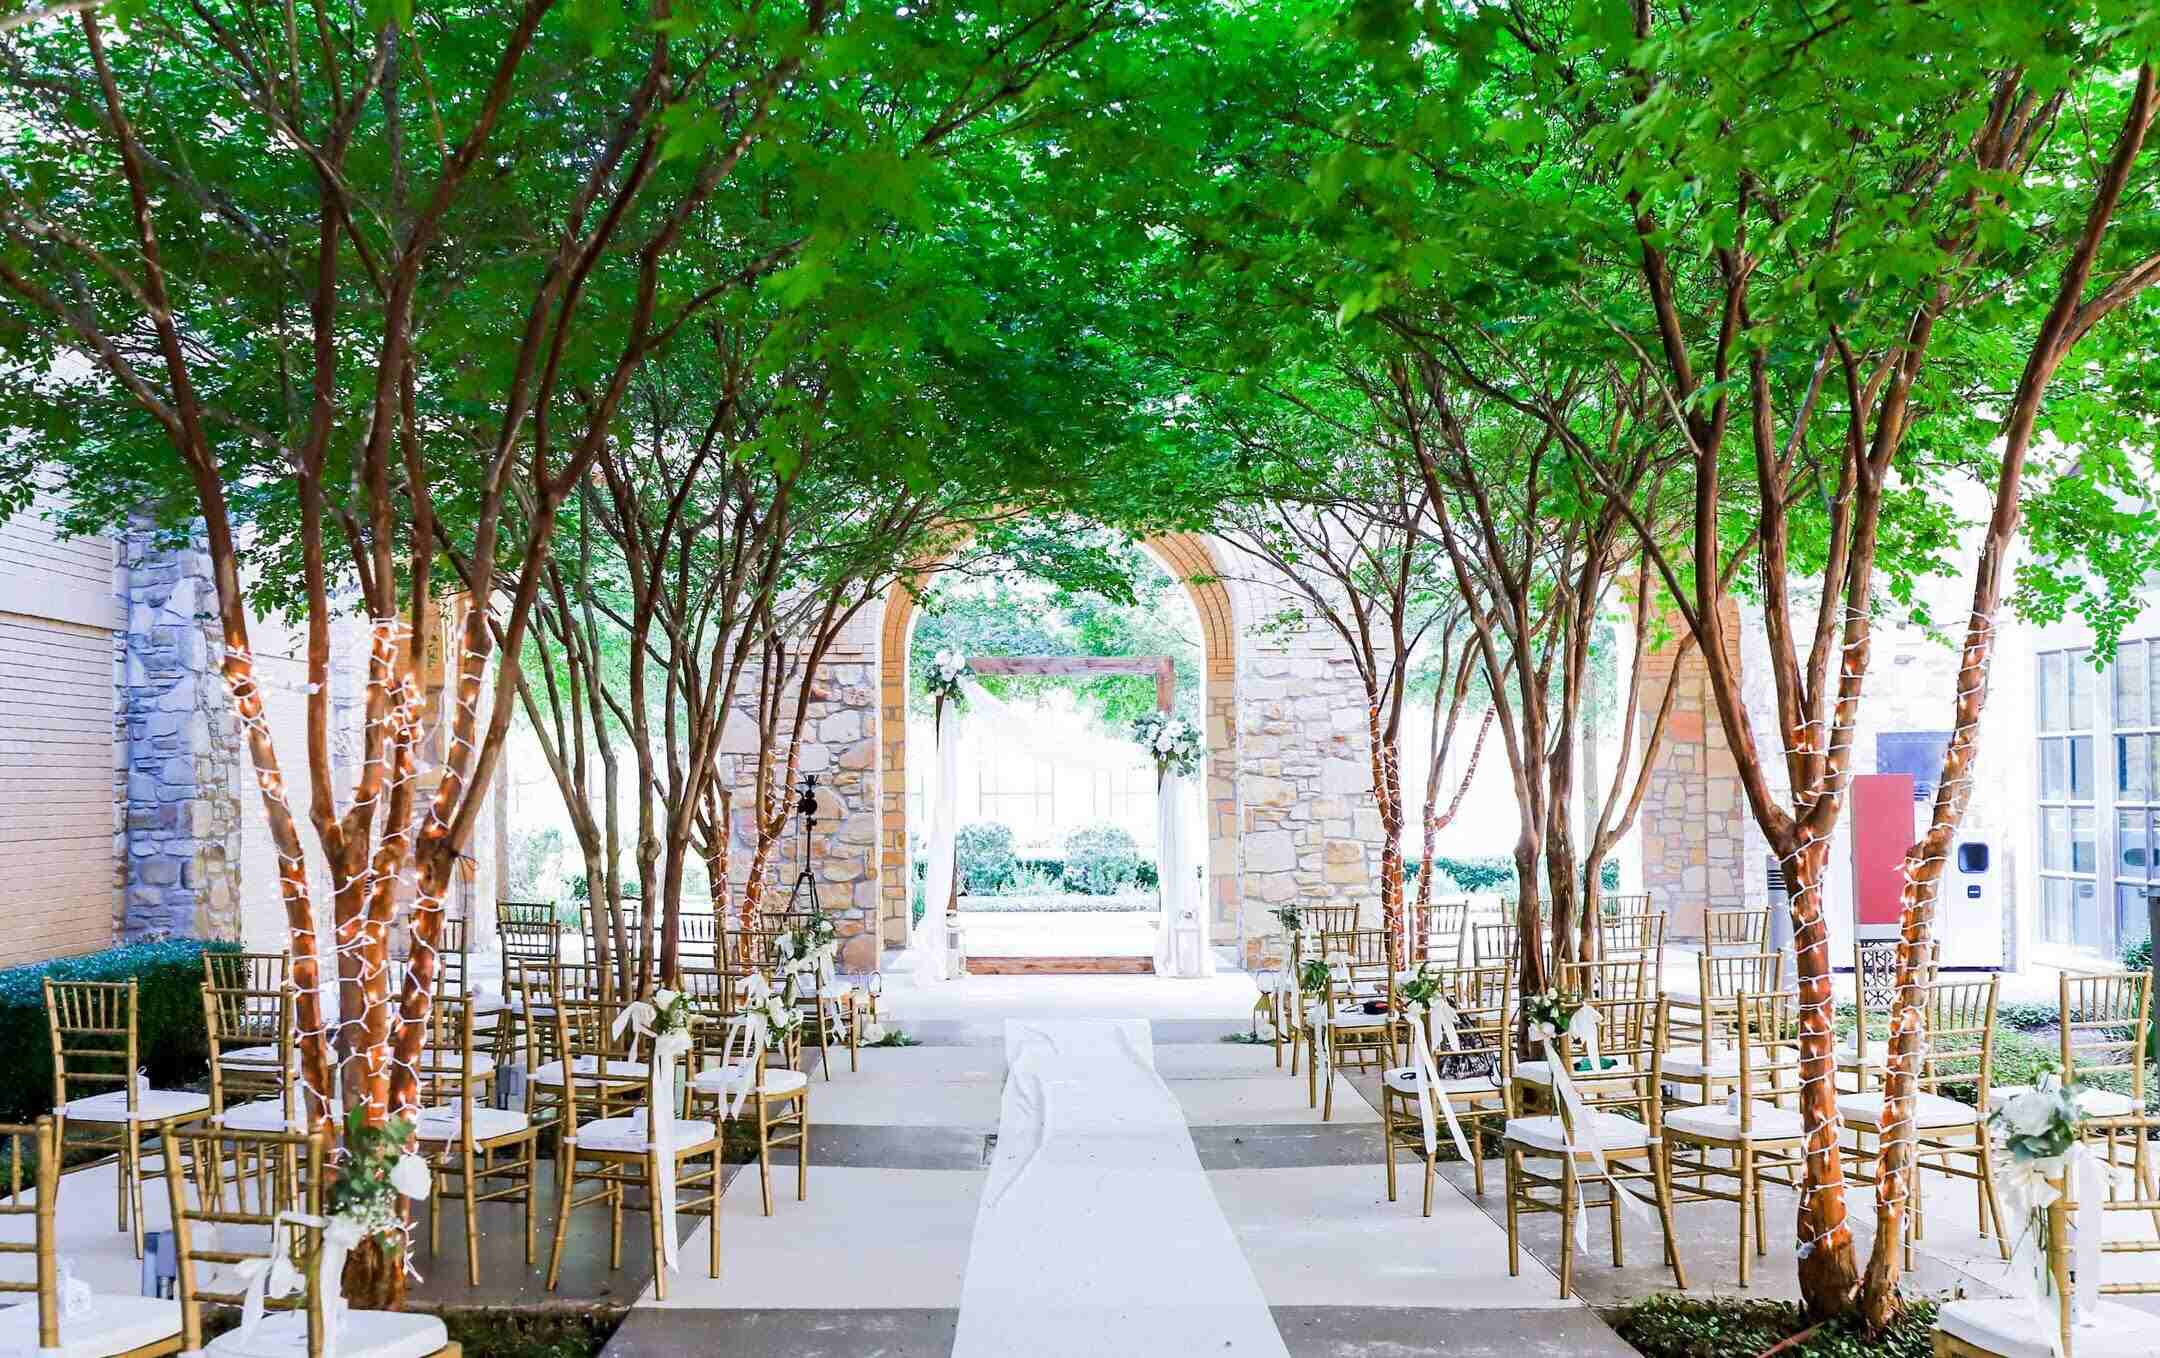 How To Stay Cool At An Outdoor Summer Wedding